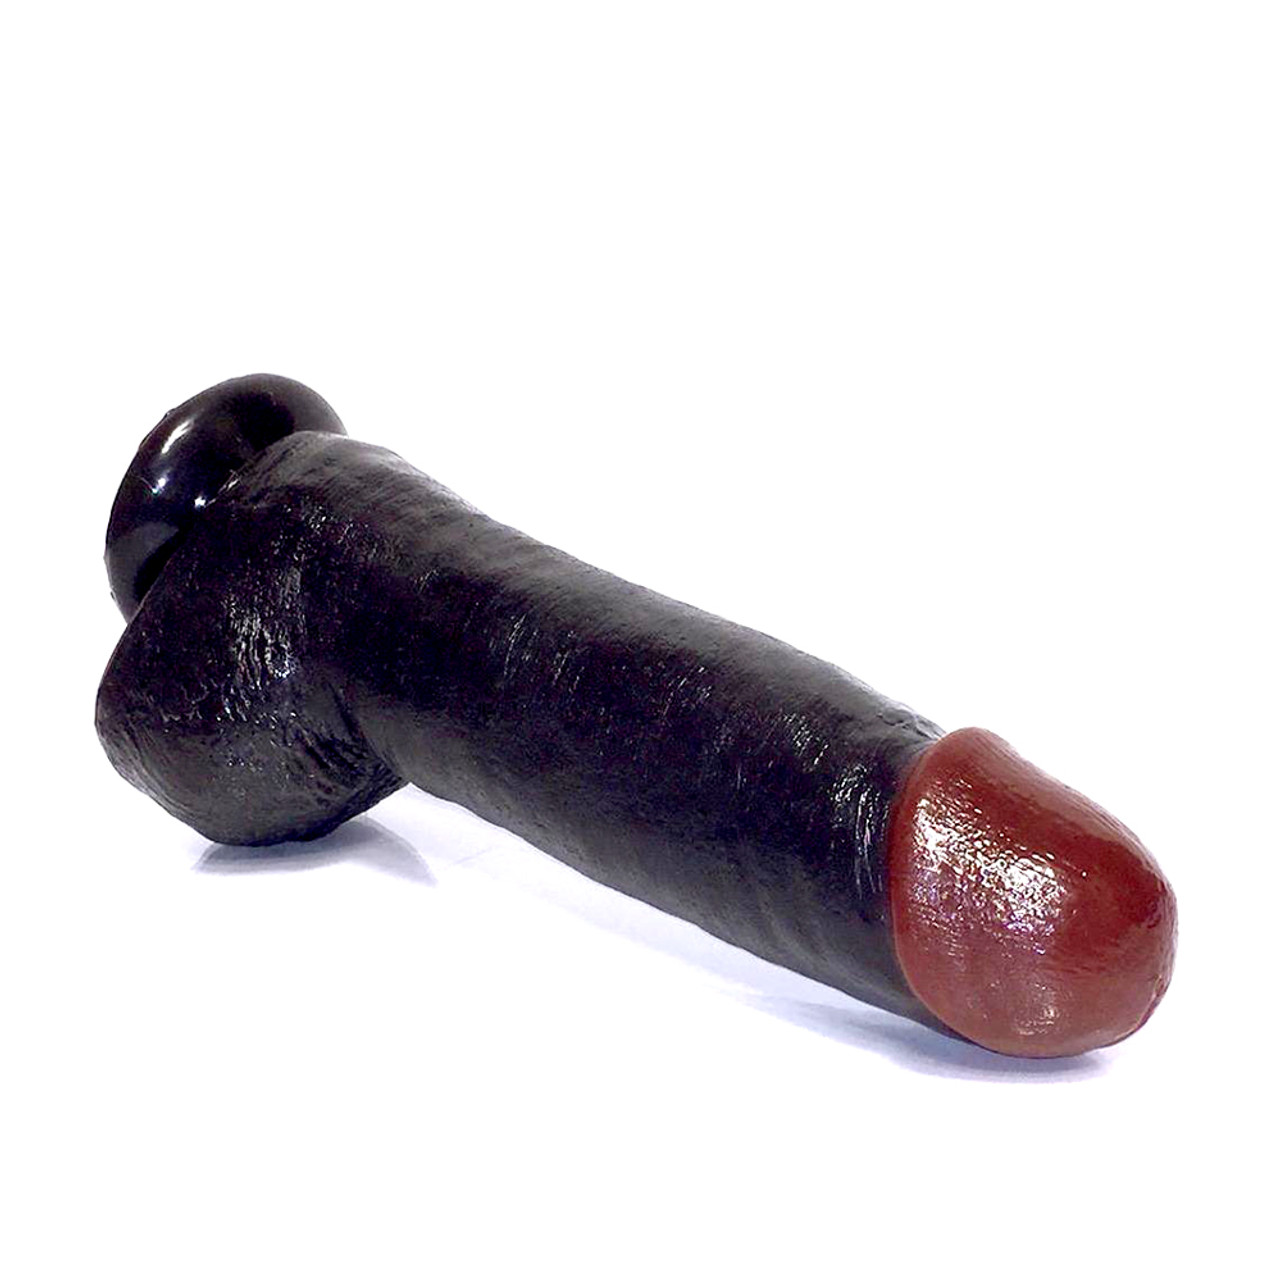 Buy the Chi Chi Larues Black Balled 12 inch Realistic Dildo with Suction Cup BBC Dong pic